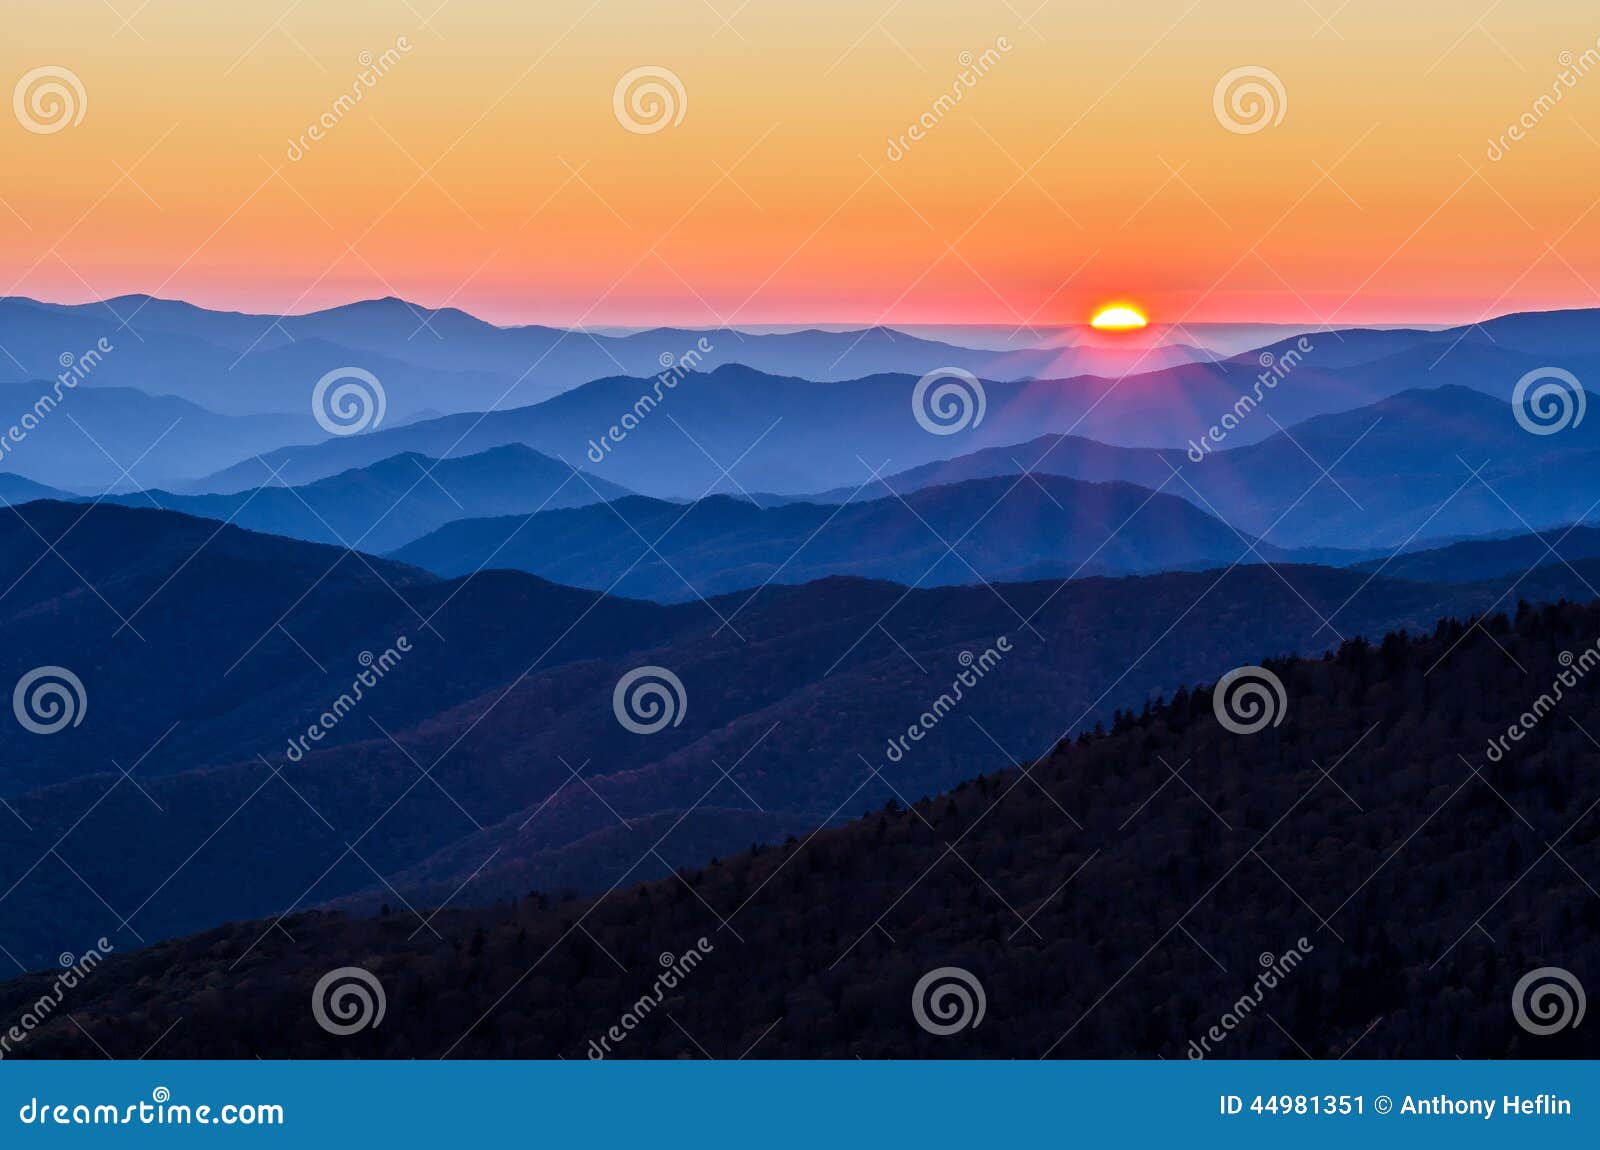 clingmans dome, great smoky mountains, tennessee